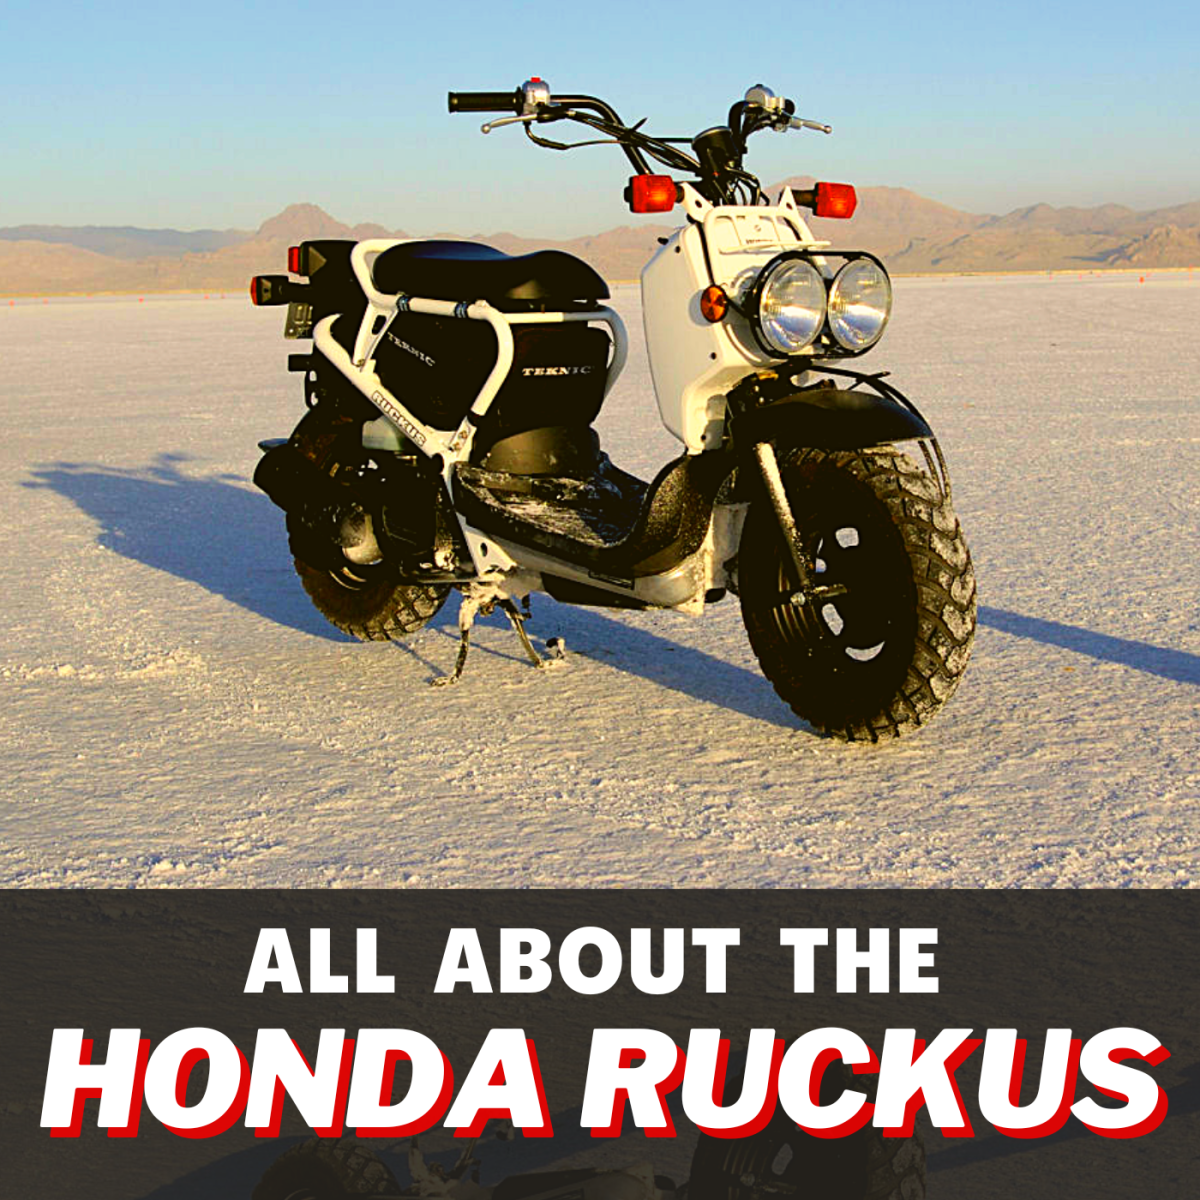 Honda Ruckus Review: Specs, Cost, Pictures, and Videos